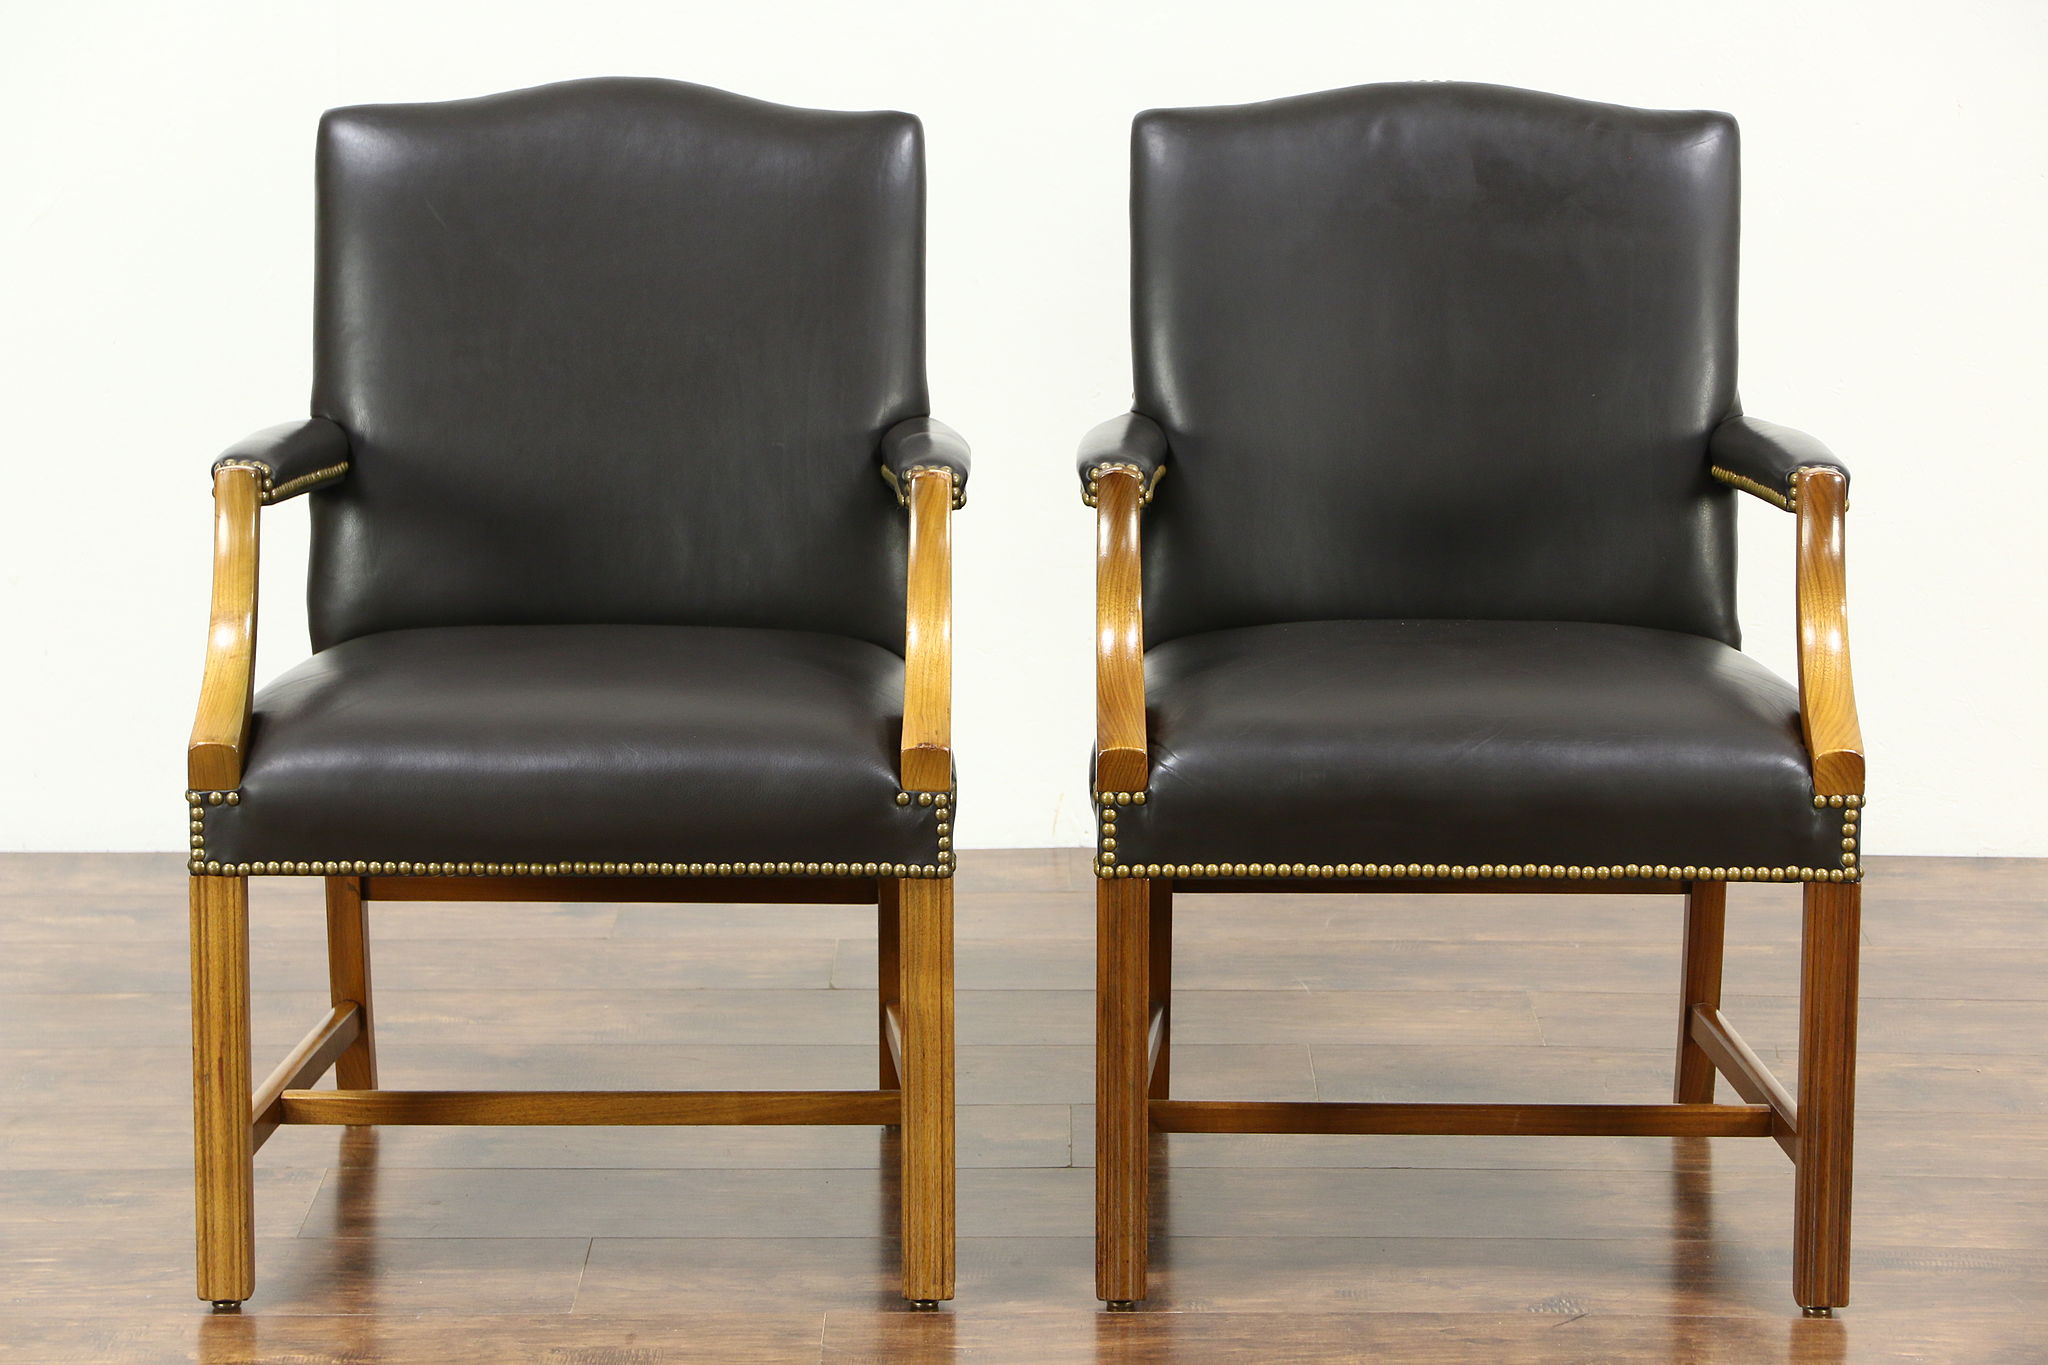 Sold Pair Of Leather Vintage Office Or Library Chairs With Arms